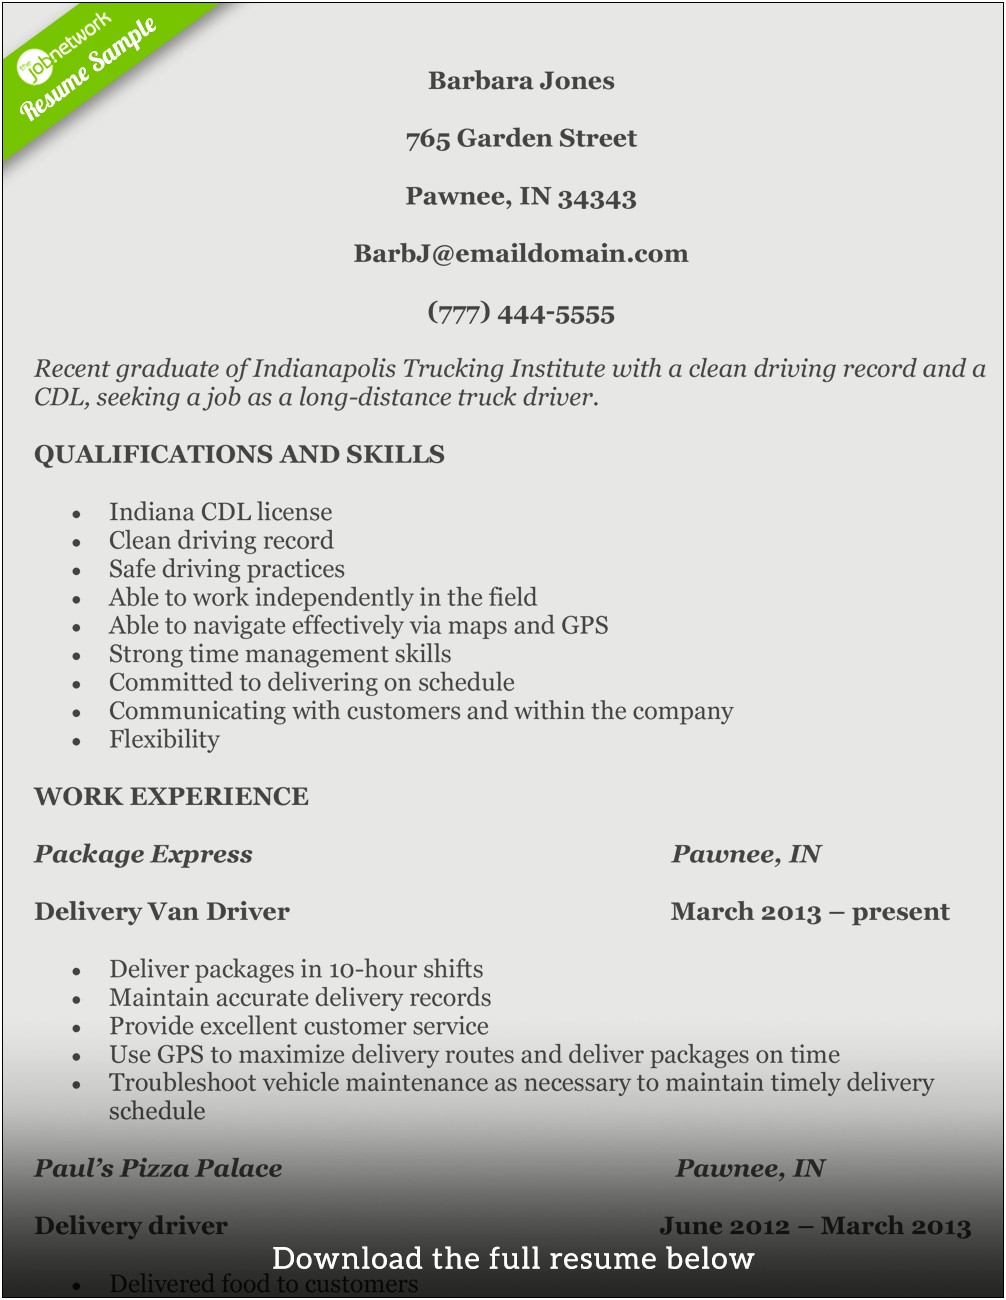 Resumes For Truck Driver Managers